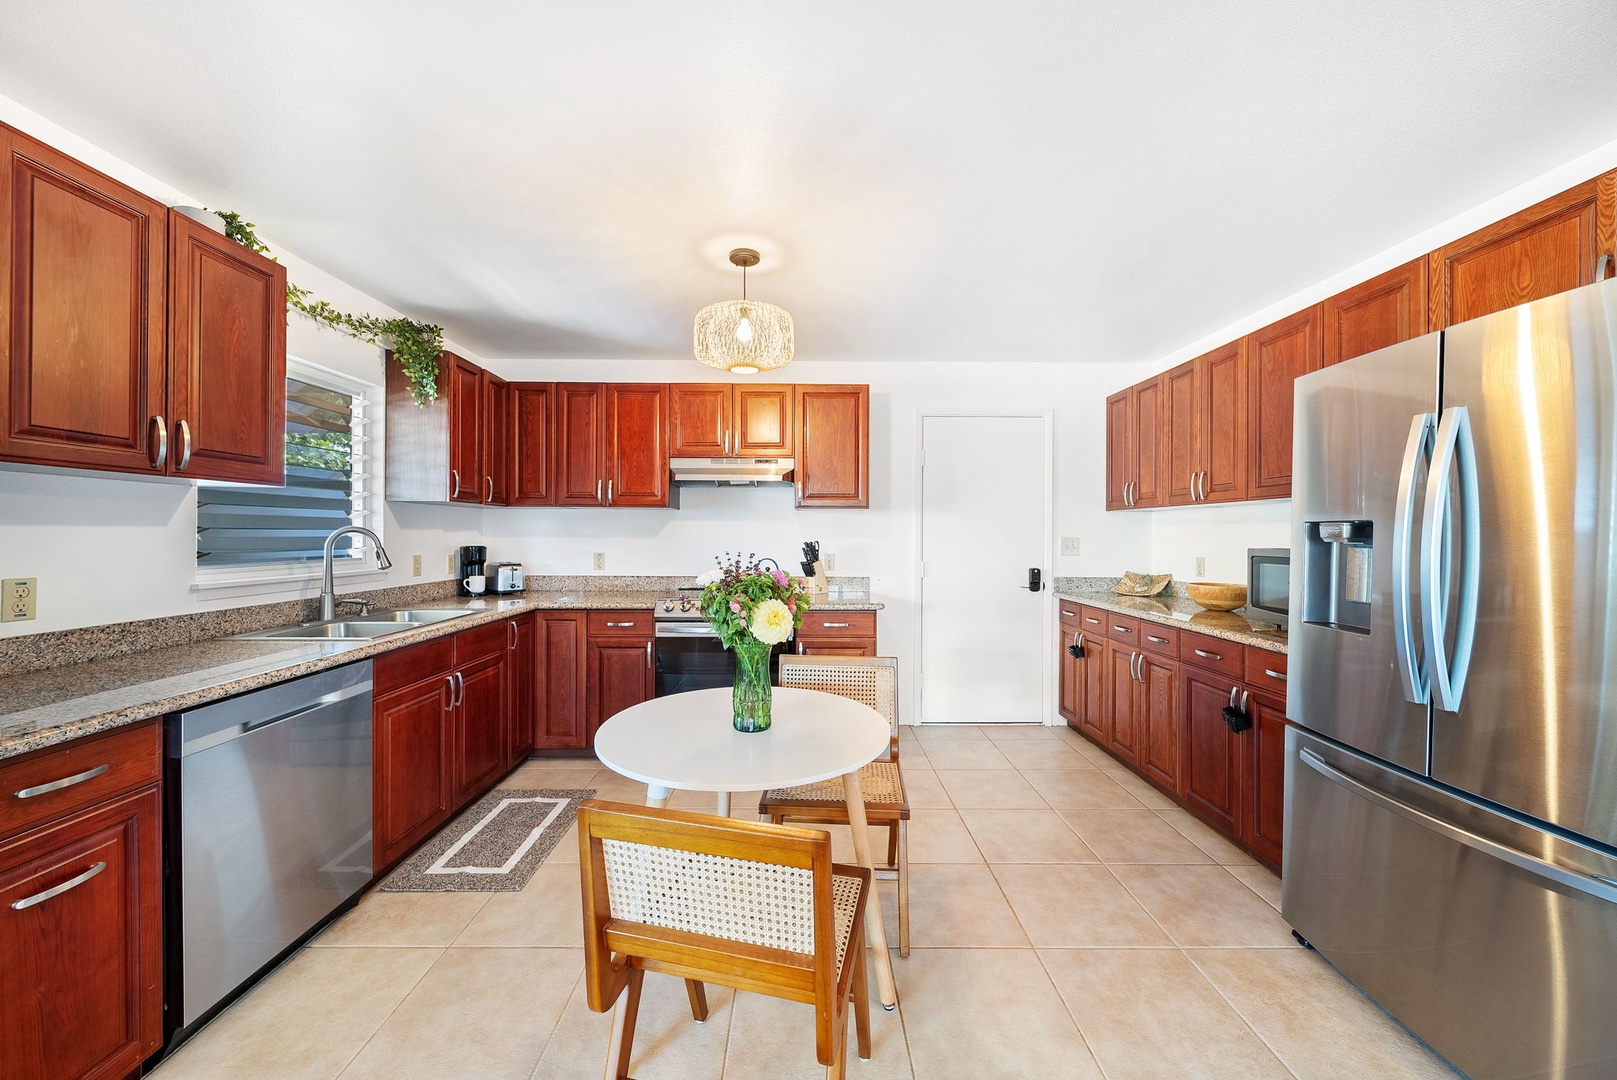 Haleiwa Vacation Rentals, Pikai Hale - Cook your favorite meals in this fully-equipped kitchen with stainless steel appliances